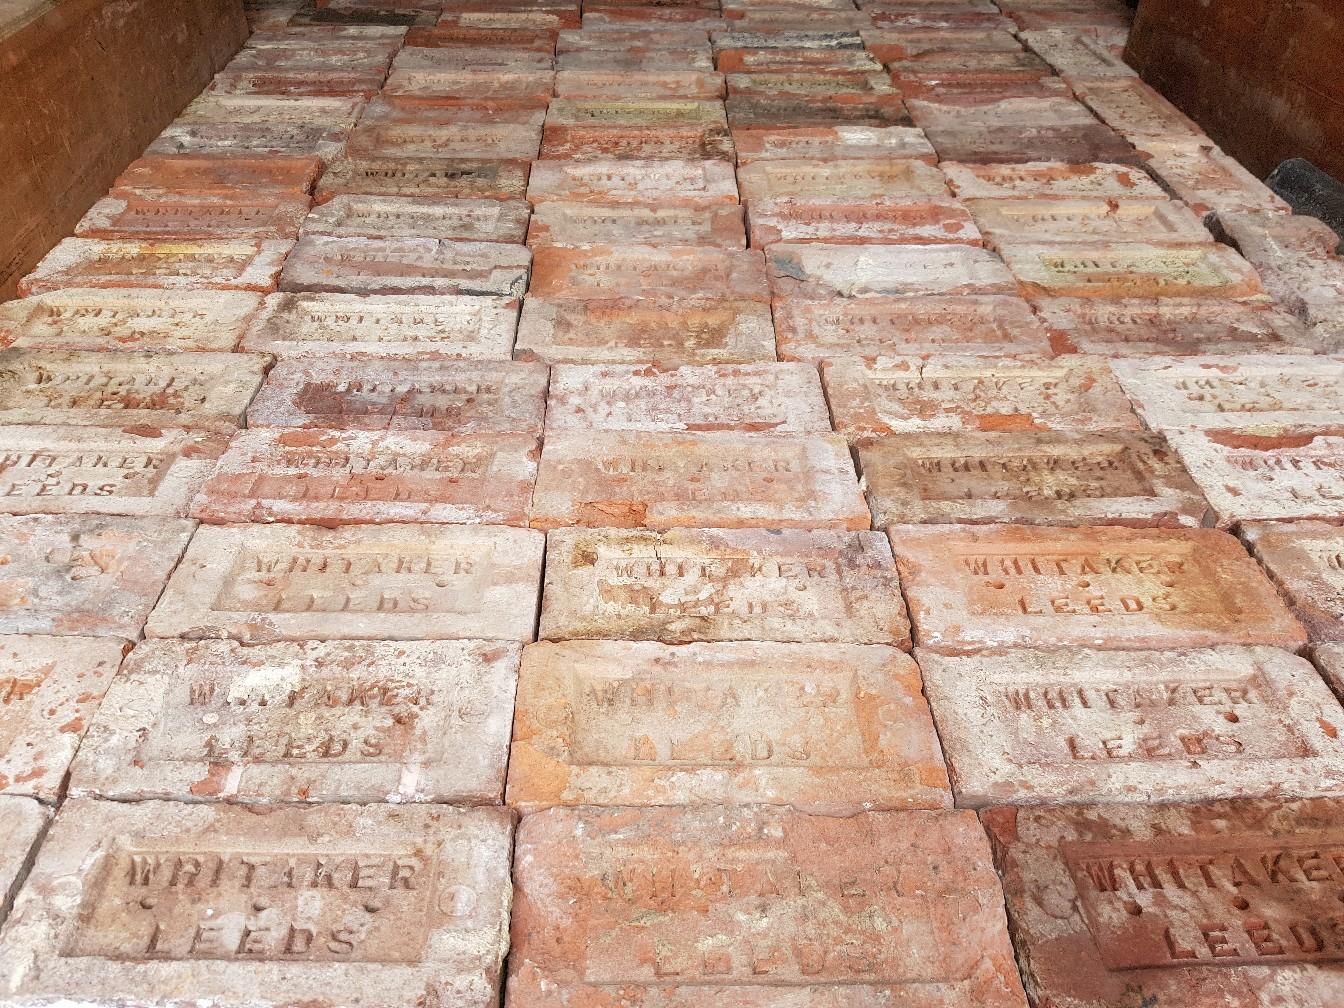 100 Reclaimed Whitaker Bricks All Only £20 In Ls12 Leeds For £2000 For Sale Shpock 